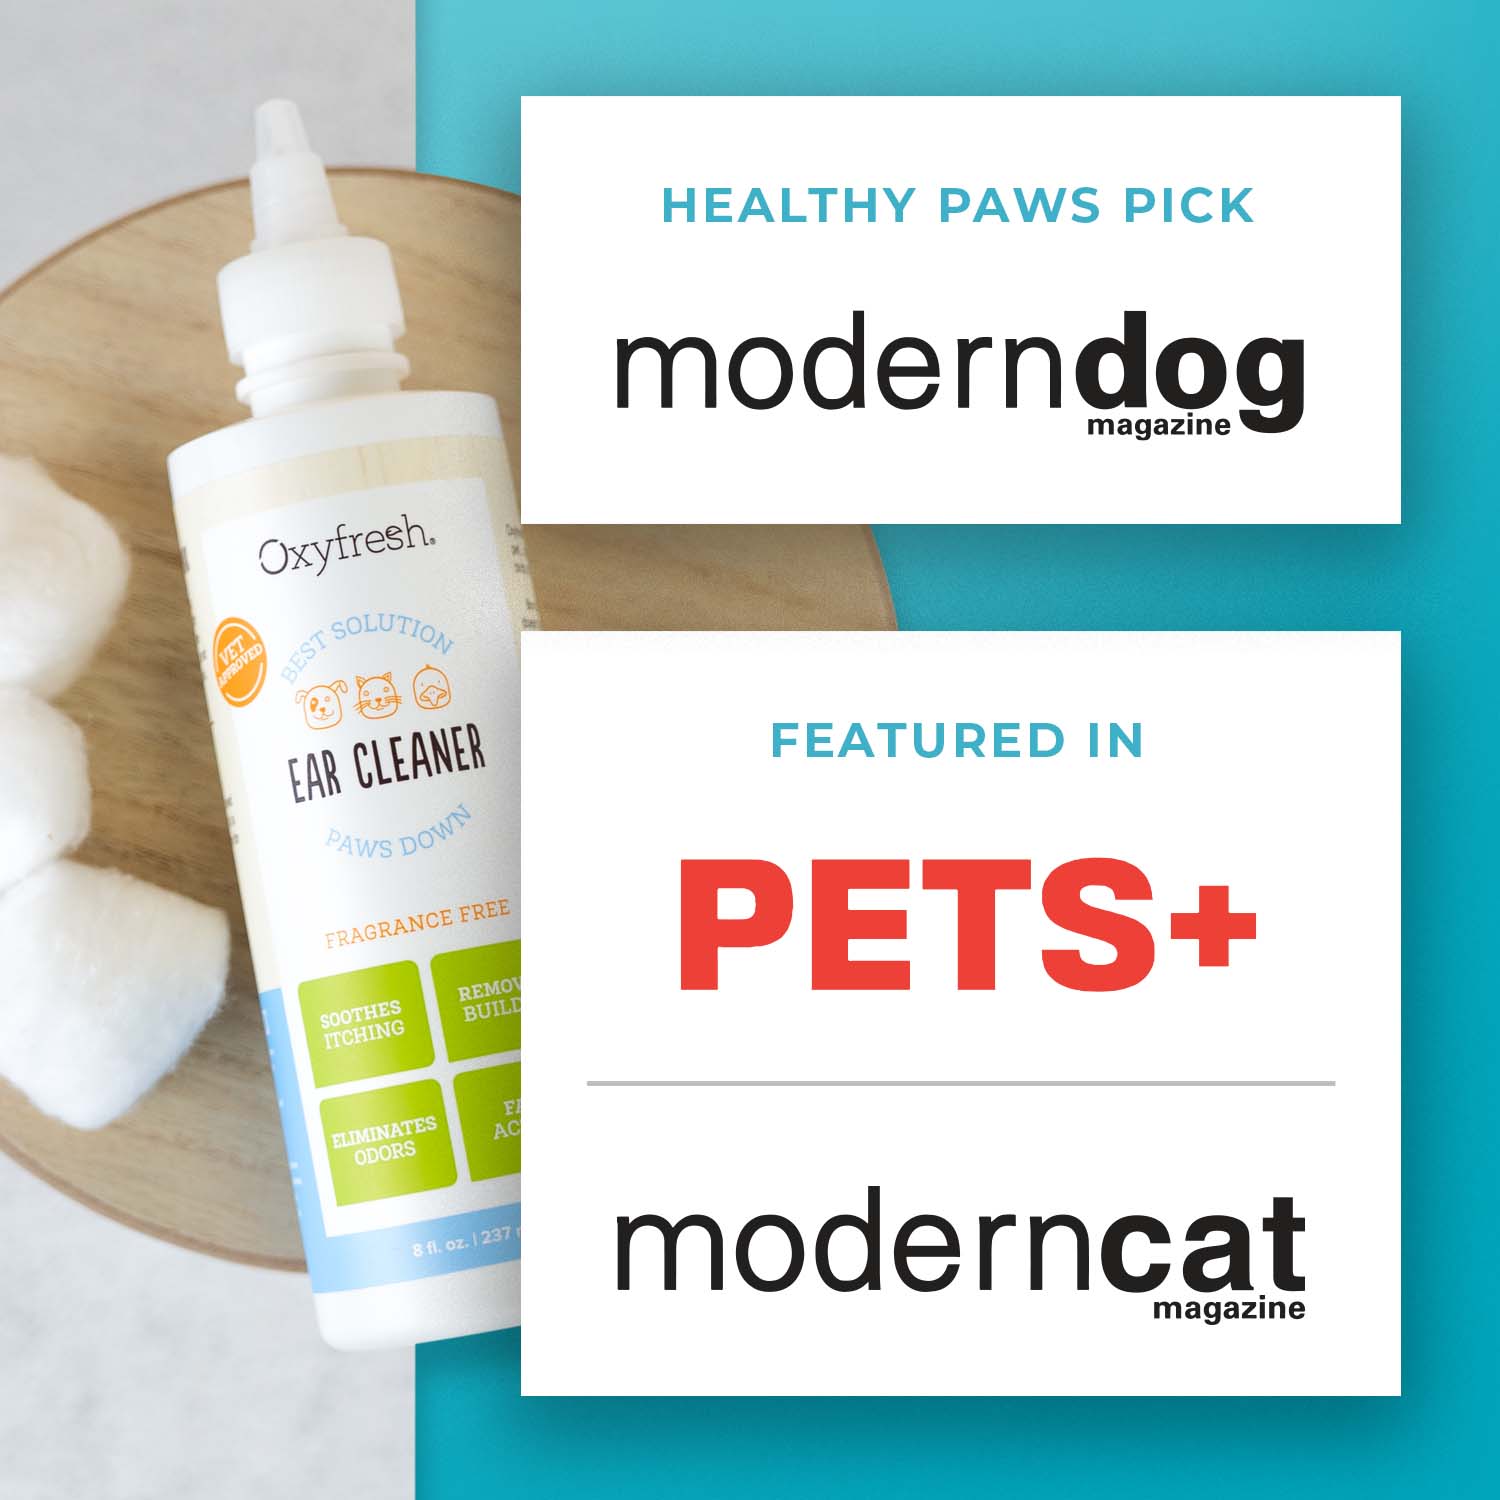 oxyfresh pet ear cleaner with the words healthy paws pick by modern dog magazine, and featured in pets+ and moderncat magazine